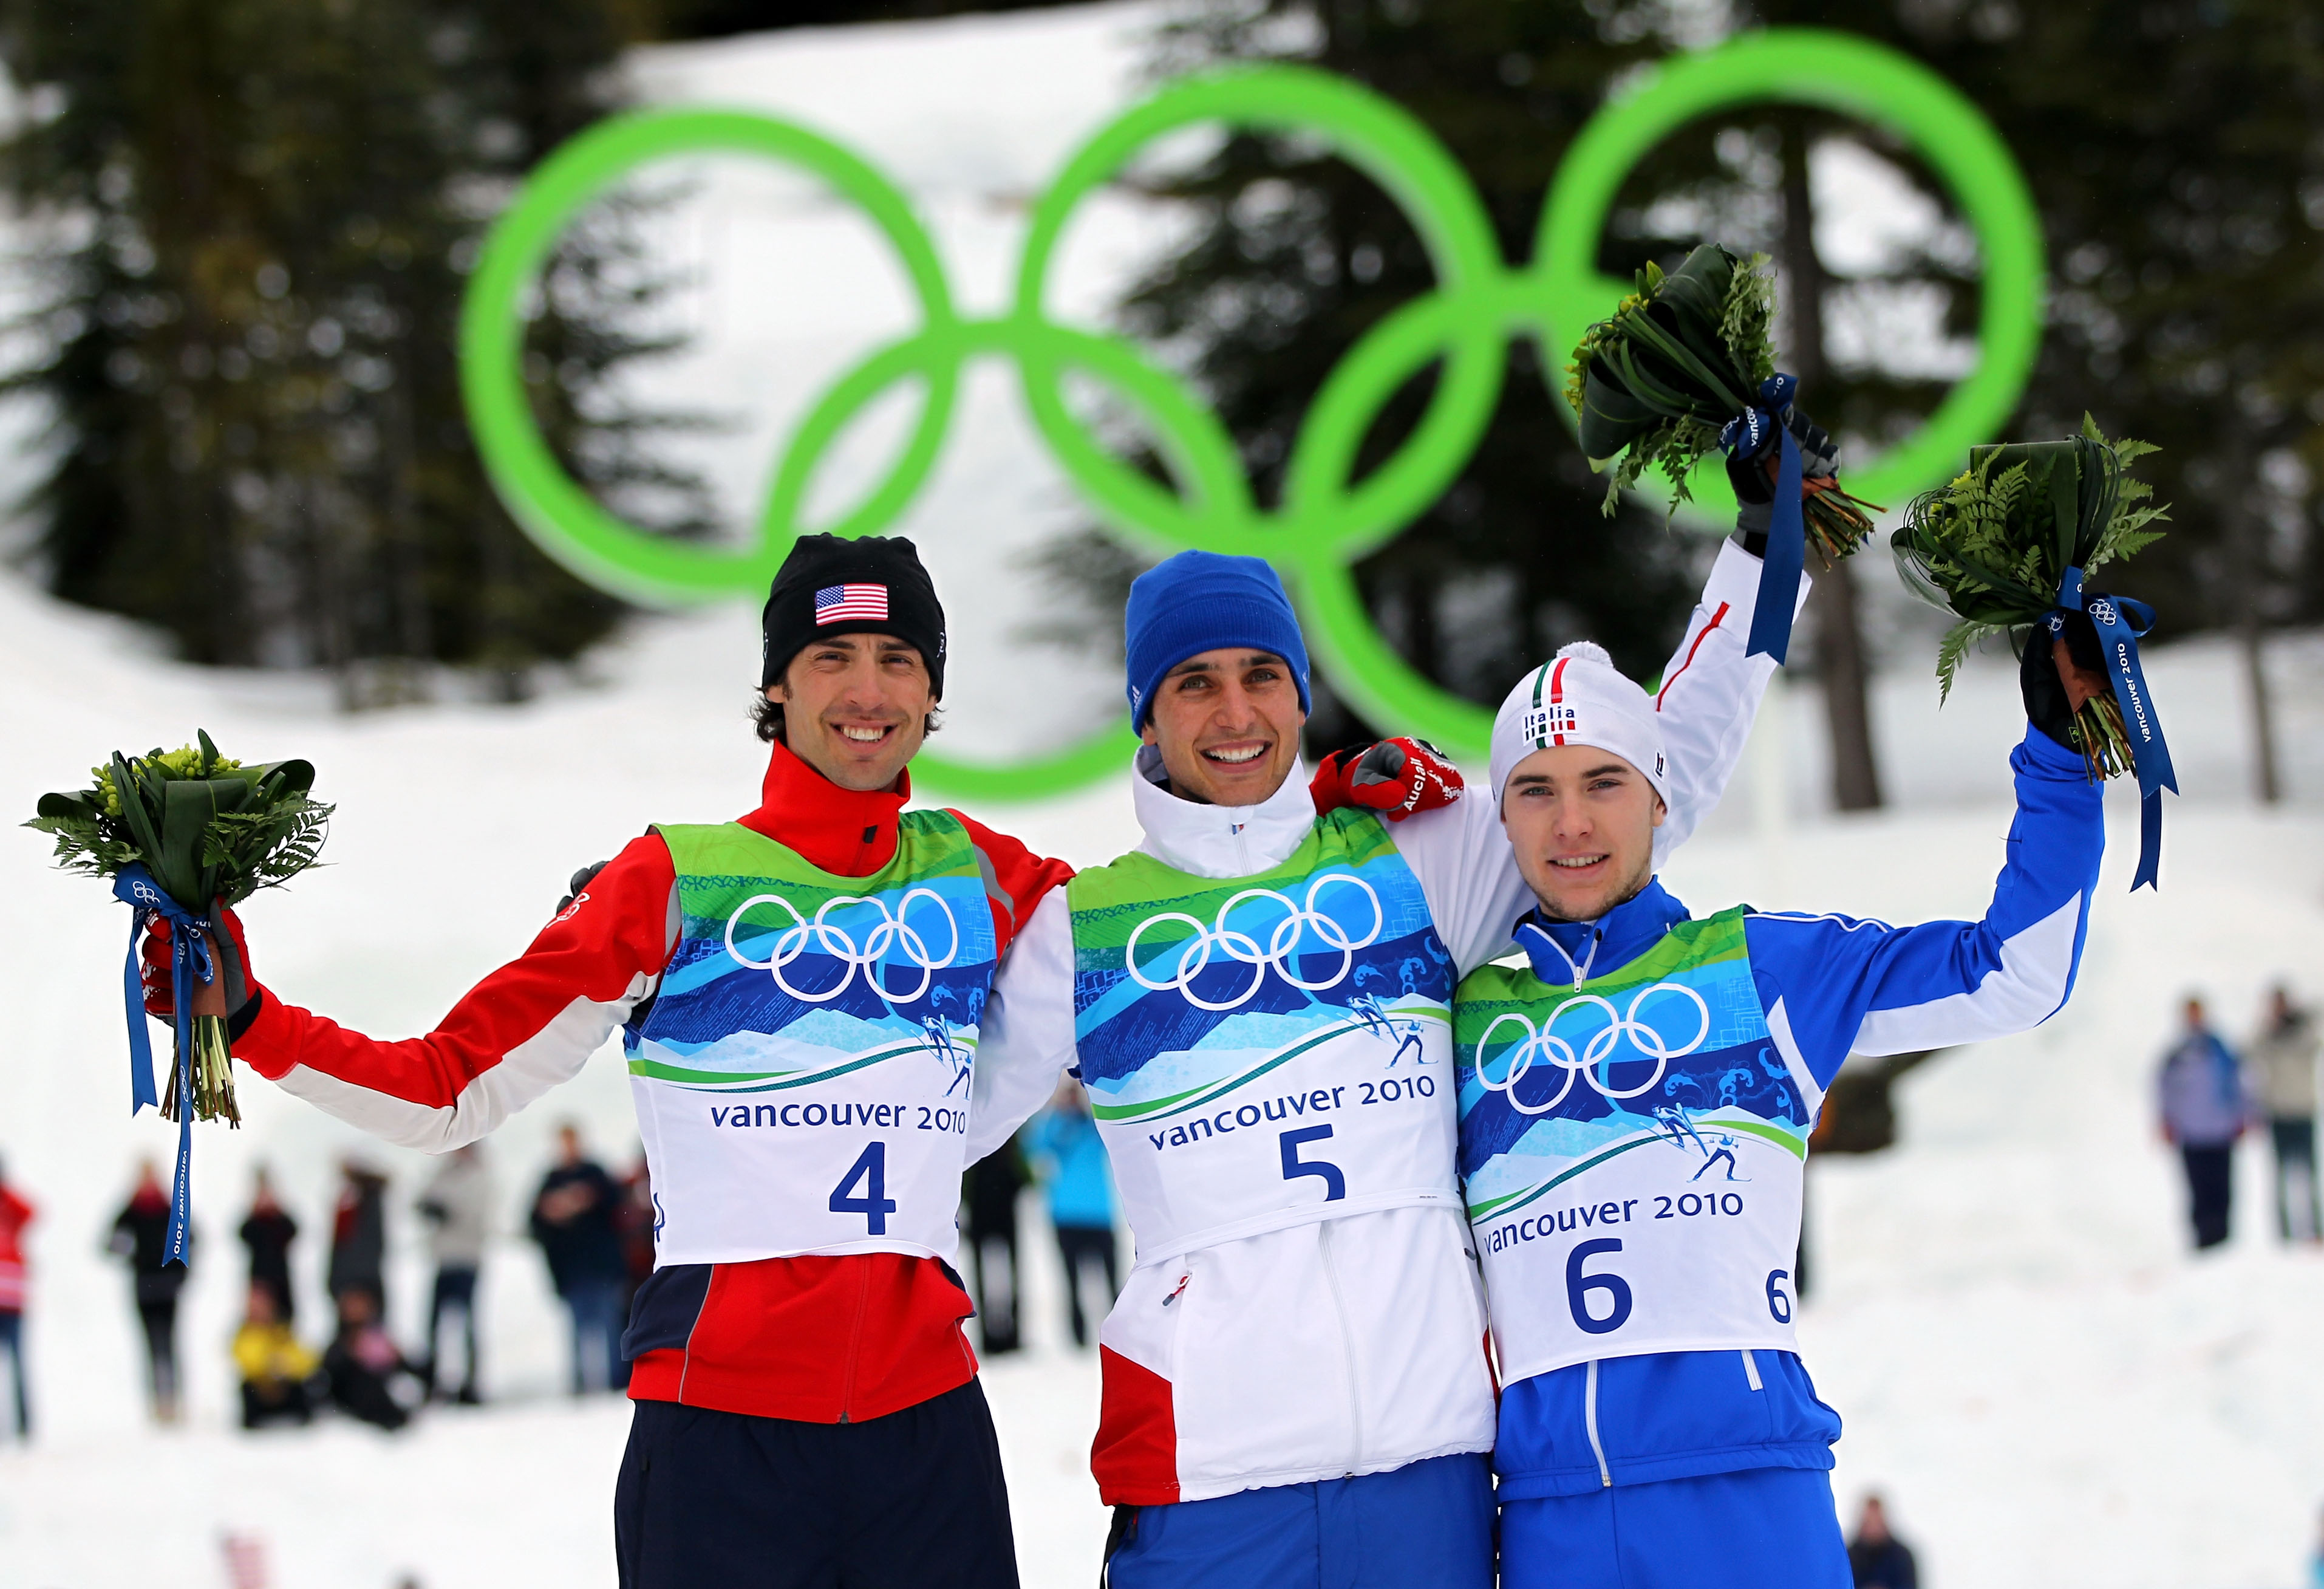 WHISTLER, BC - FEBRUARY 14: (L-R) Johnny Spillane (silver) of United States, Jason Lamy Chappuis (gold) of France and Alessandro Pittin (bronze) of Italy pose during the flower ceremony following the Nordic Combined Men's Individual 10km on day 3 of the 2010 Winter Olympics at Whistler Olympic Park Cross-Country Stadium on February 14, 2010 in Whistler, Canada. (Photo by Lars Baron/Getty Images)